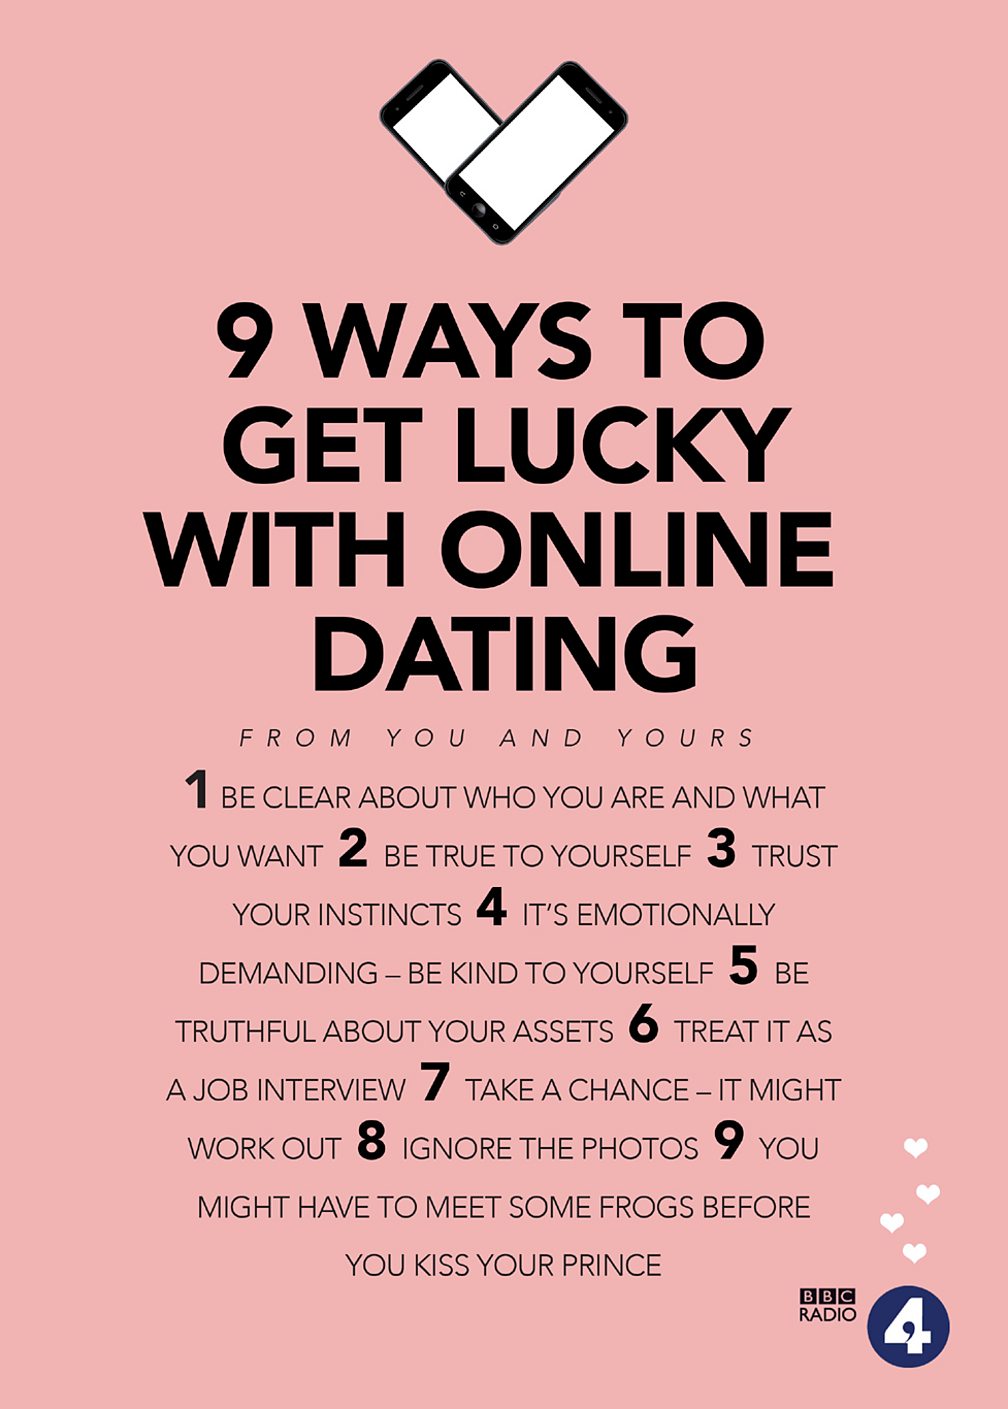 4 SAFETY ONLINE DATING TIPS EVERY WOMAN SH…